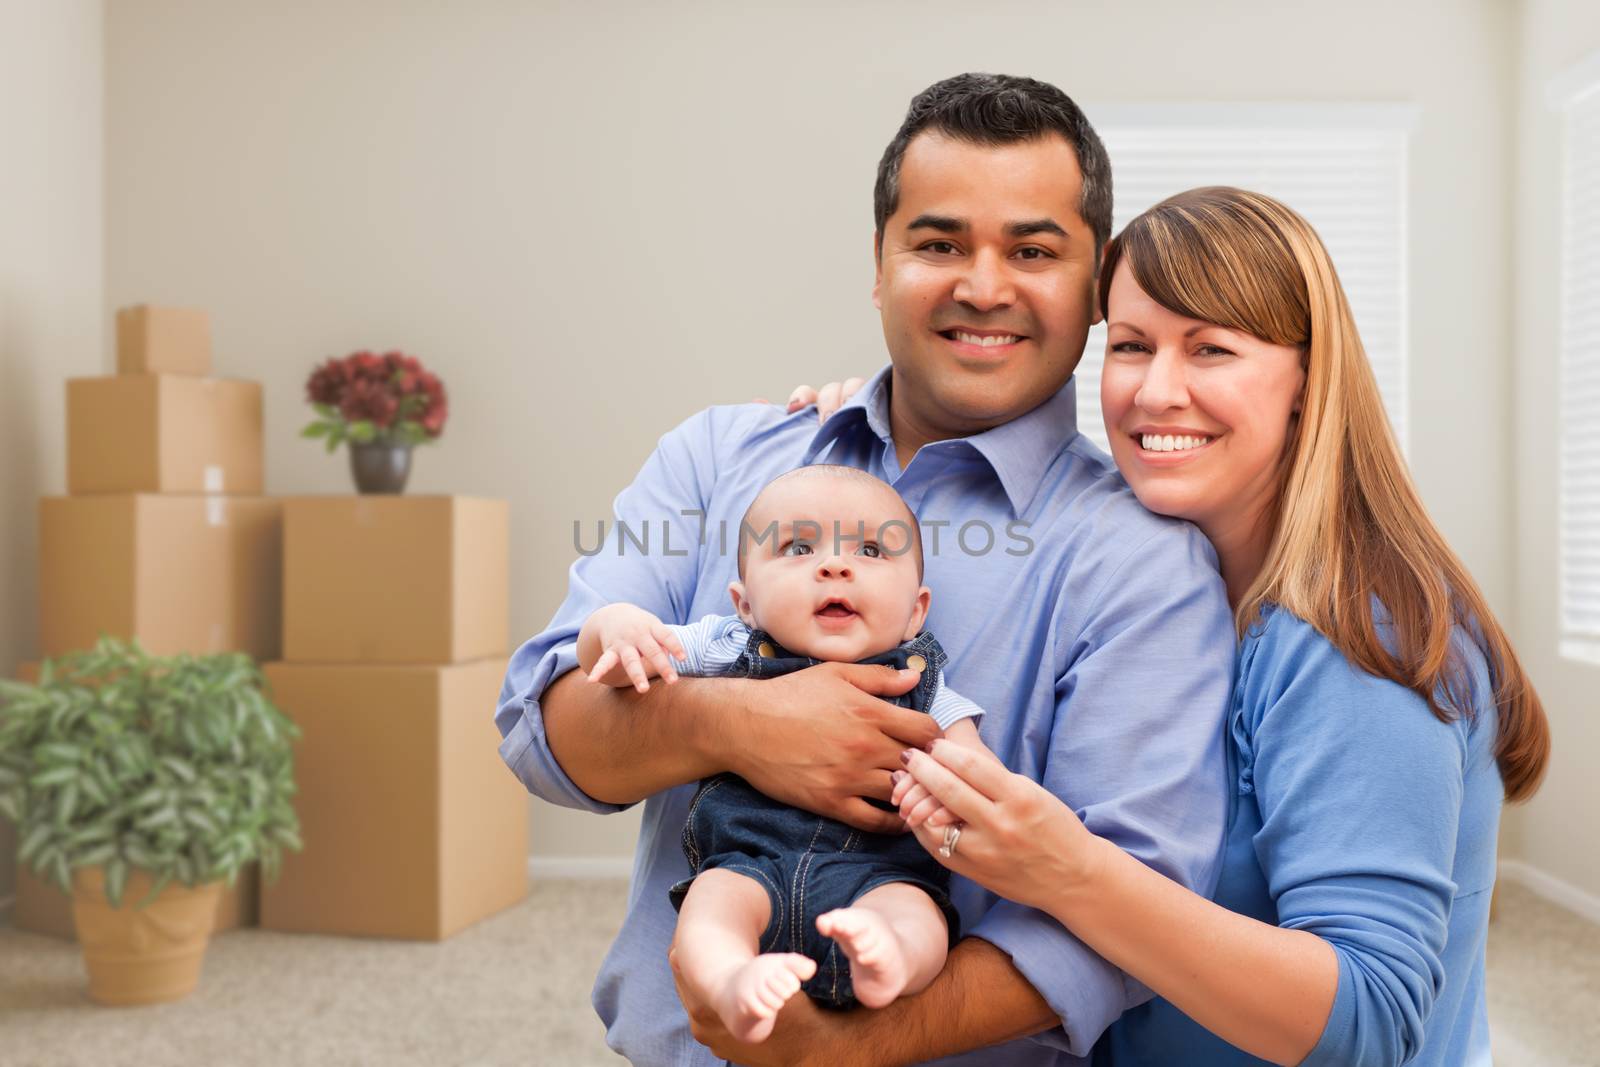 Mixed Race Family with Baby in Room with Packed Moving Boxes by Feverpitched